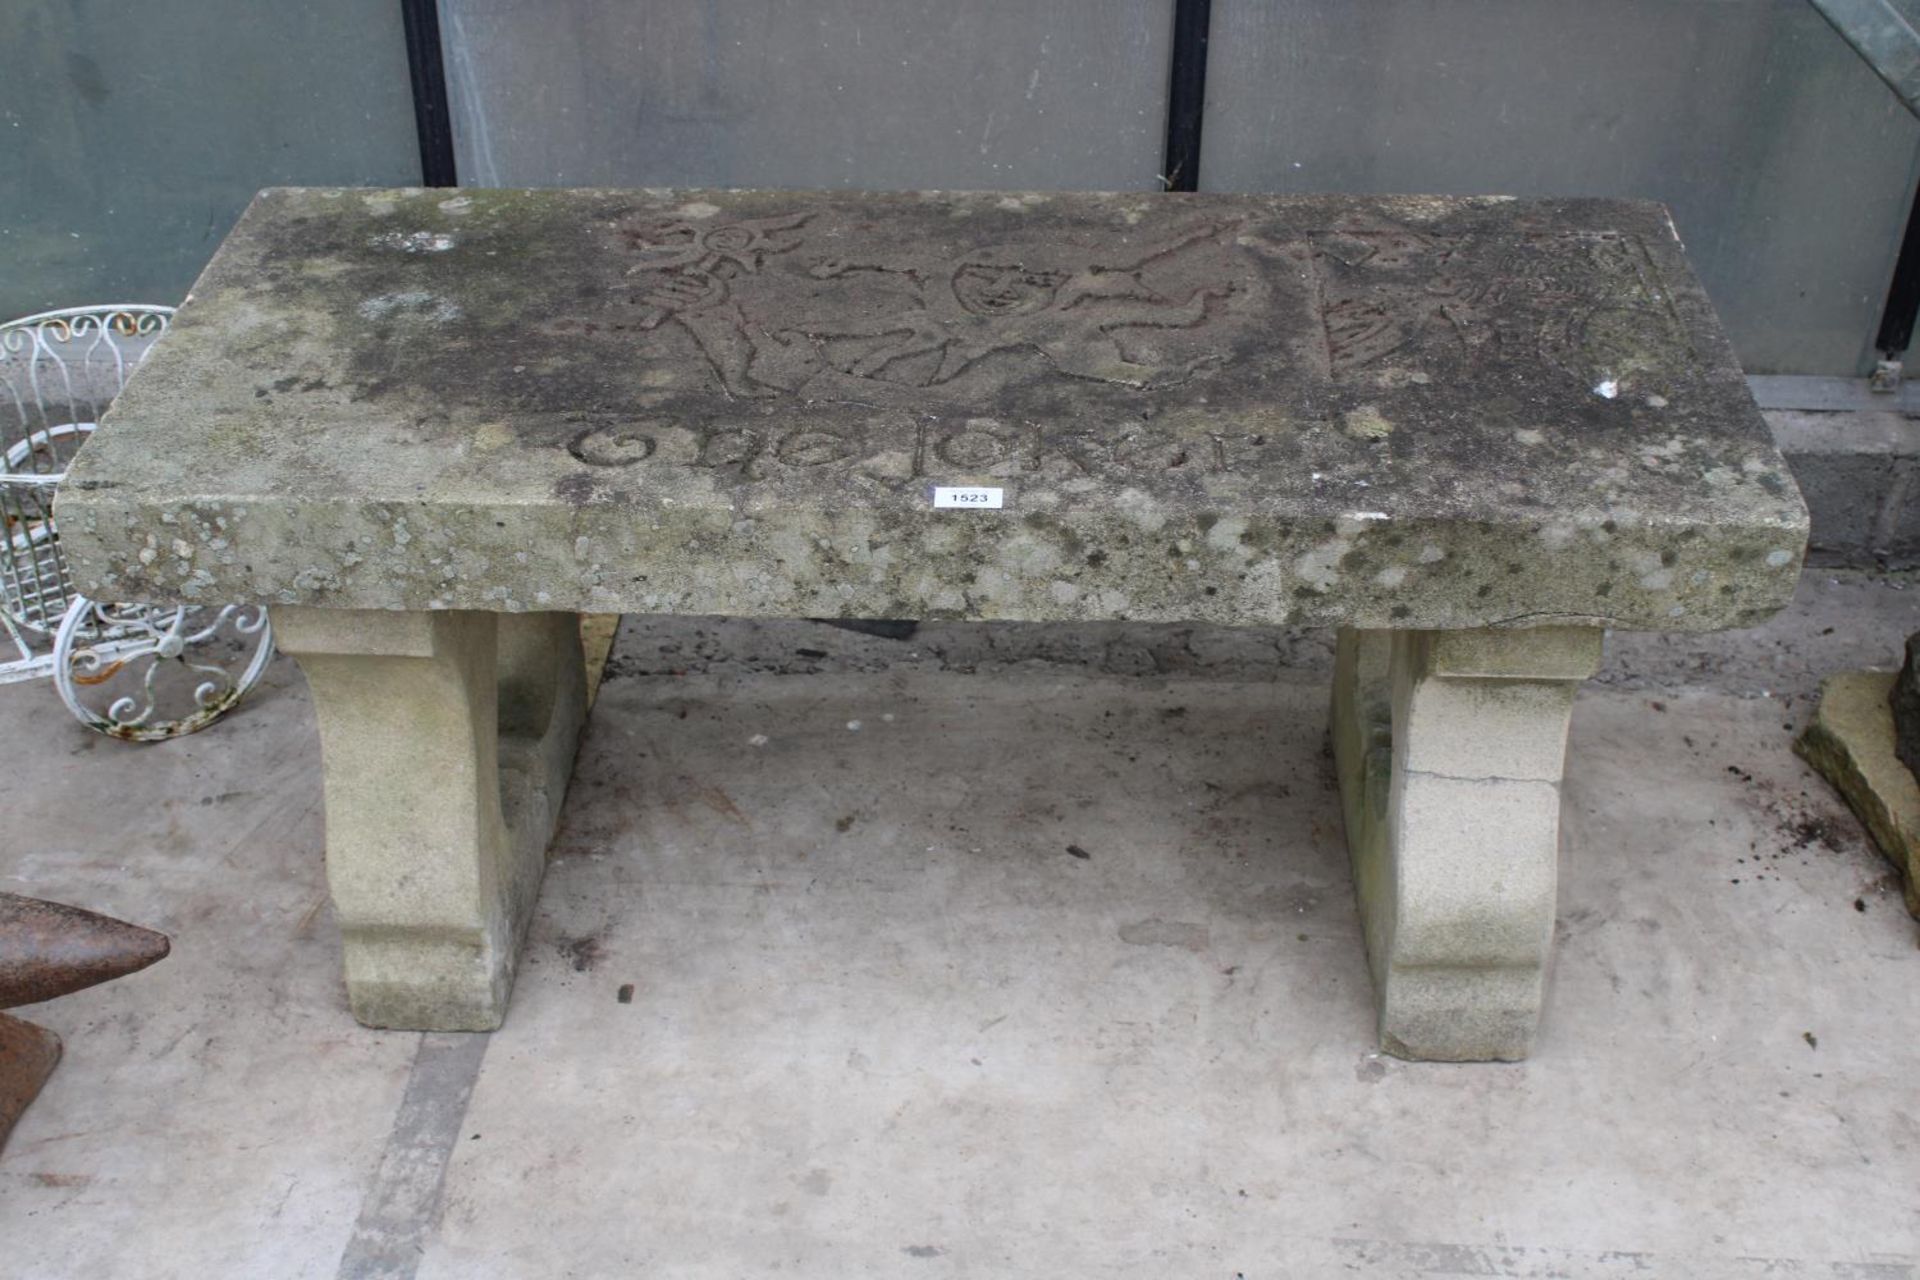 A NATURAL STONE HAND CARVED BENCH WITH 'THE JOKER' DETAIL AND PEDESTAL BASES (REQUIRES FIXING ONTO